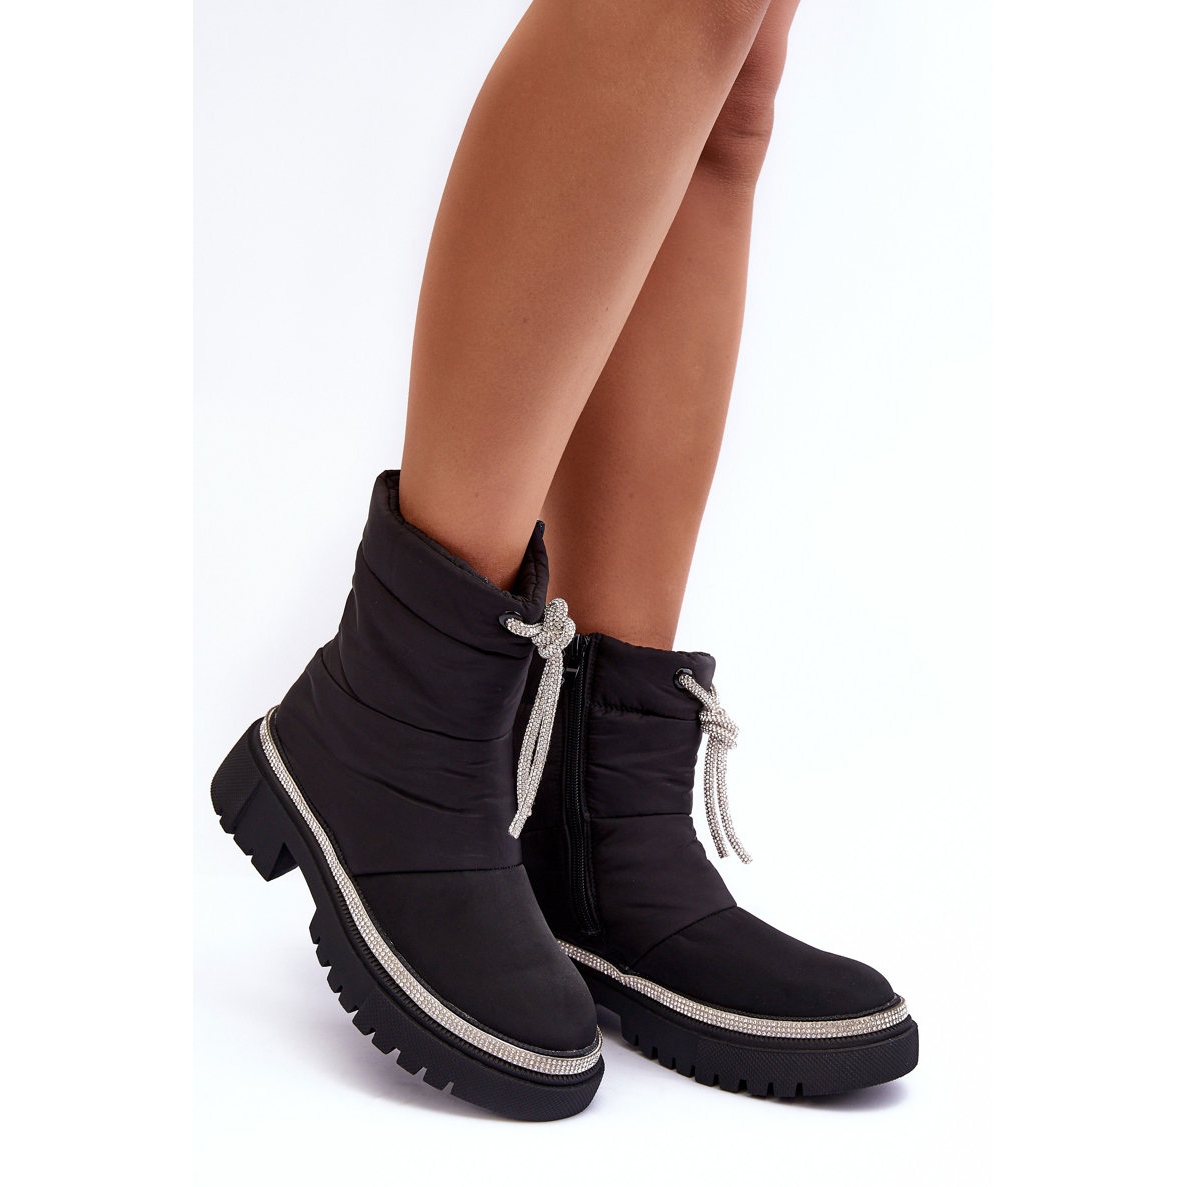 Designer Womens Winter Apres Snow Boots With Waterproof Platform, Heeled  Lace Up, Warm Fur, And Snow Booties In Black And White Available In Sizes  35 41 From Jacqueline_chou, $90.47 | DHgate.Com